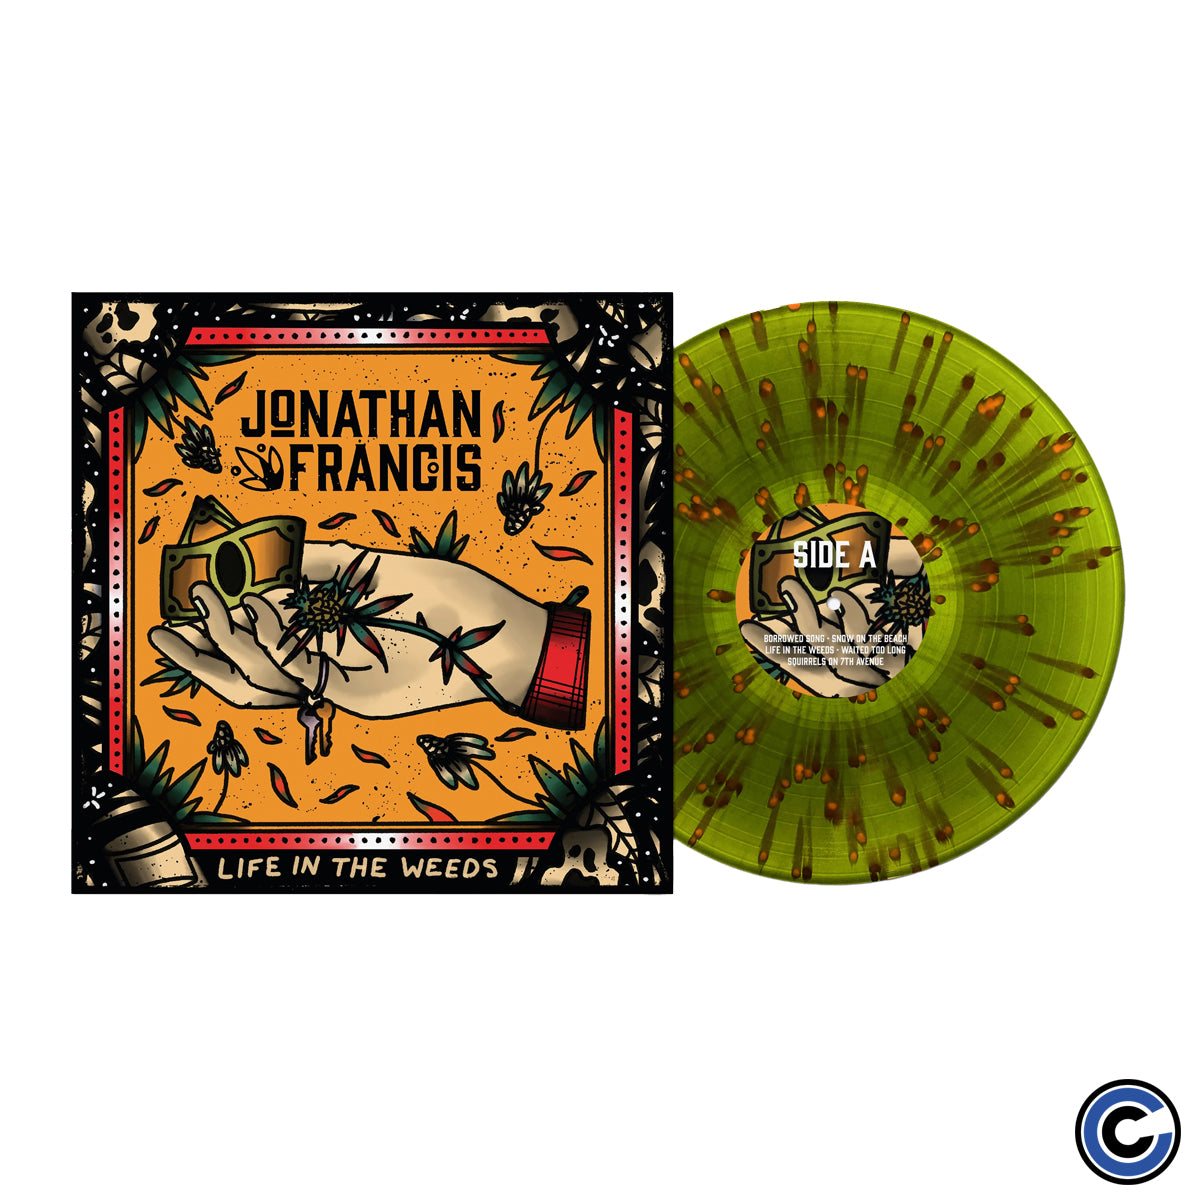 Jonathan Francis "Life in The Weeds" 12" Vinyl